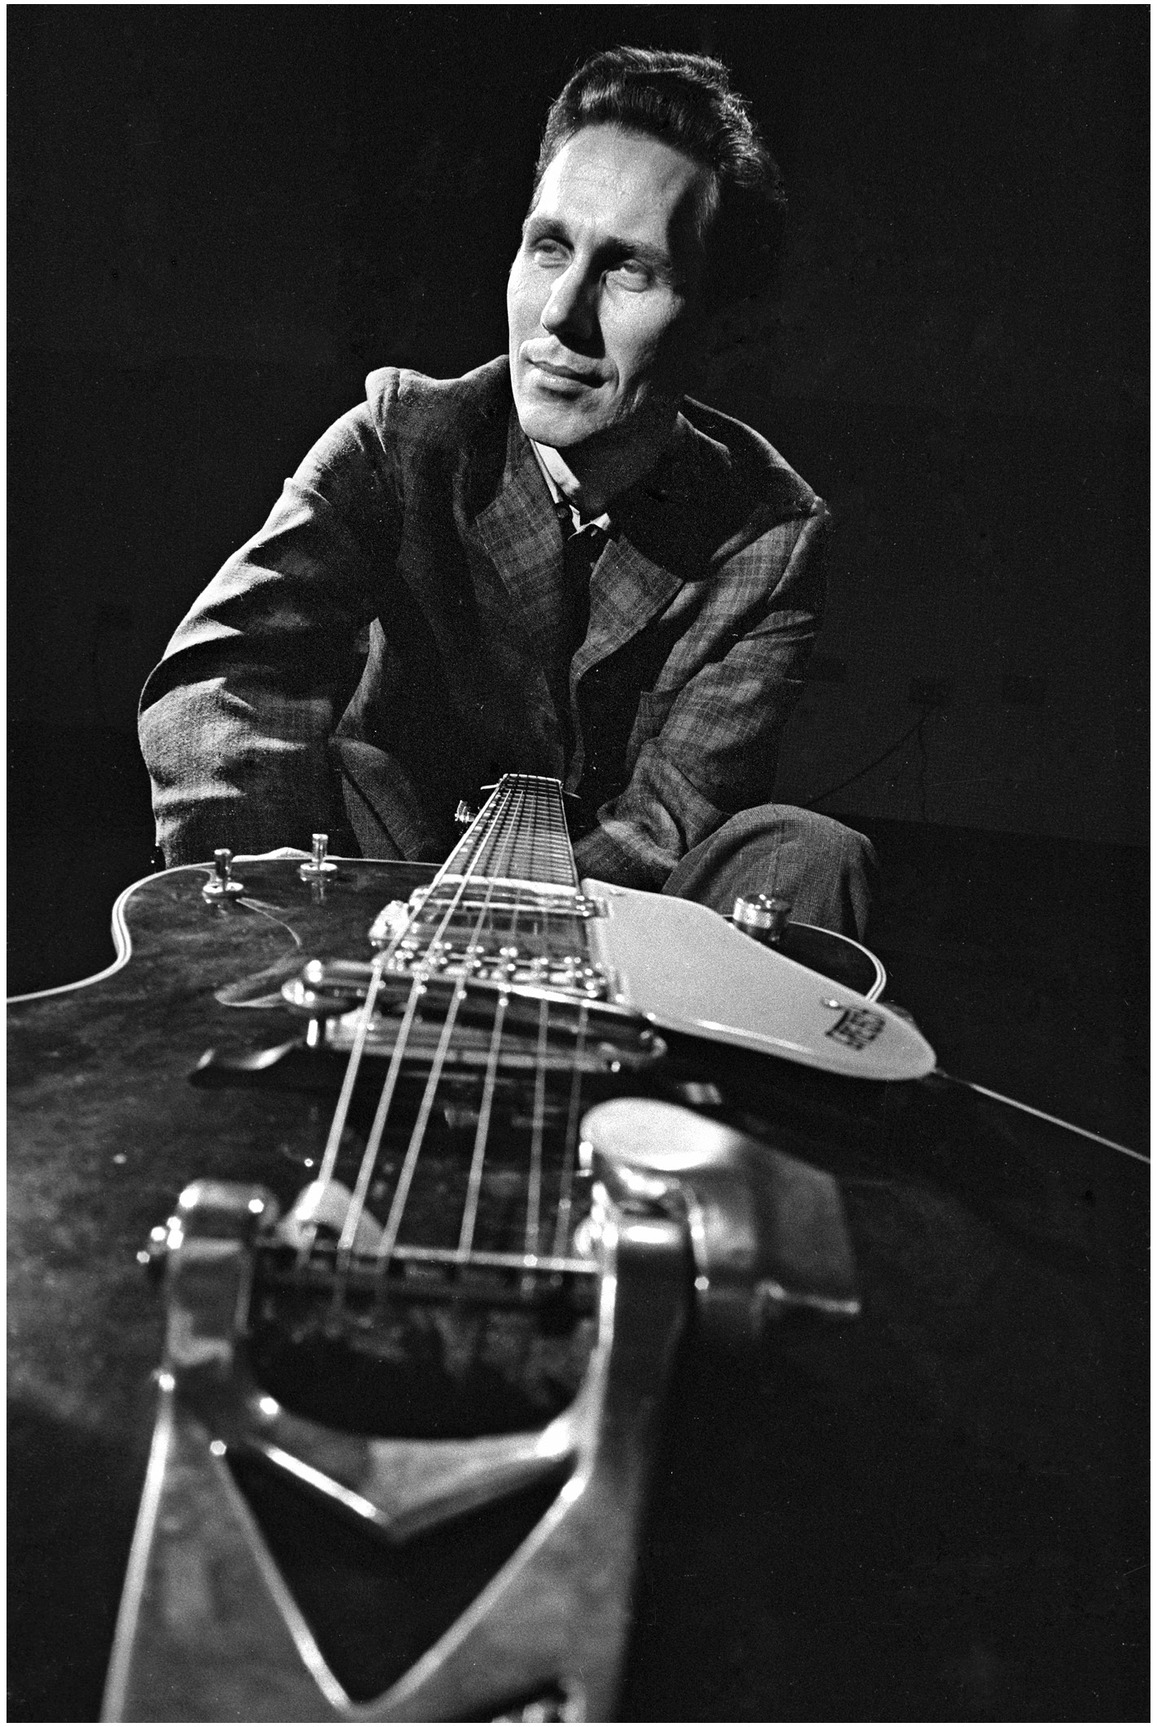 UNSPECIFIED - JANUARY 01:  Photo of Chet Atkins  (Photo by Michael Ochs Archives/Getty Images)